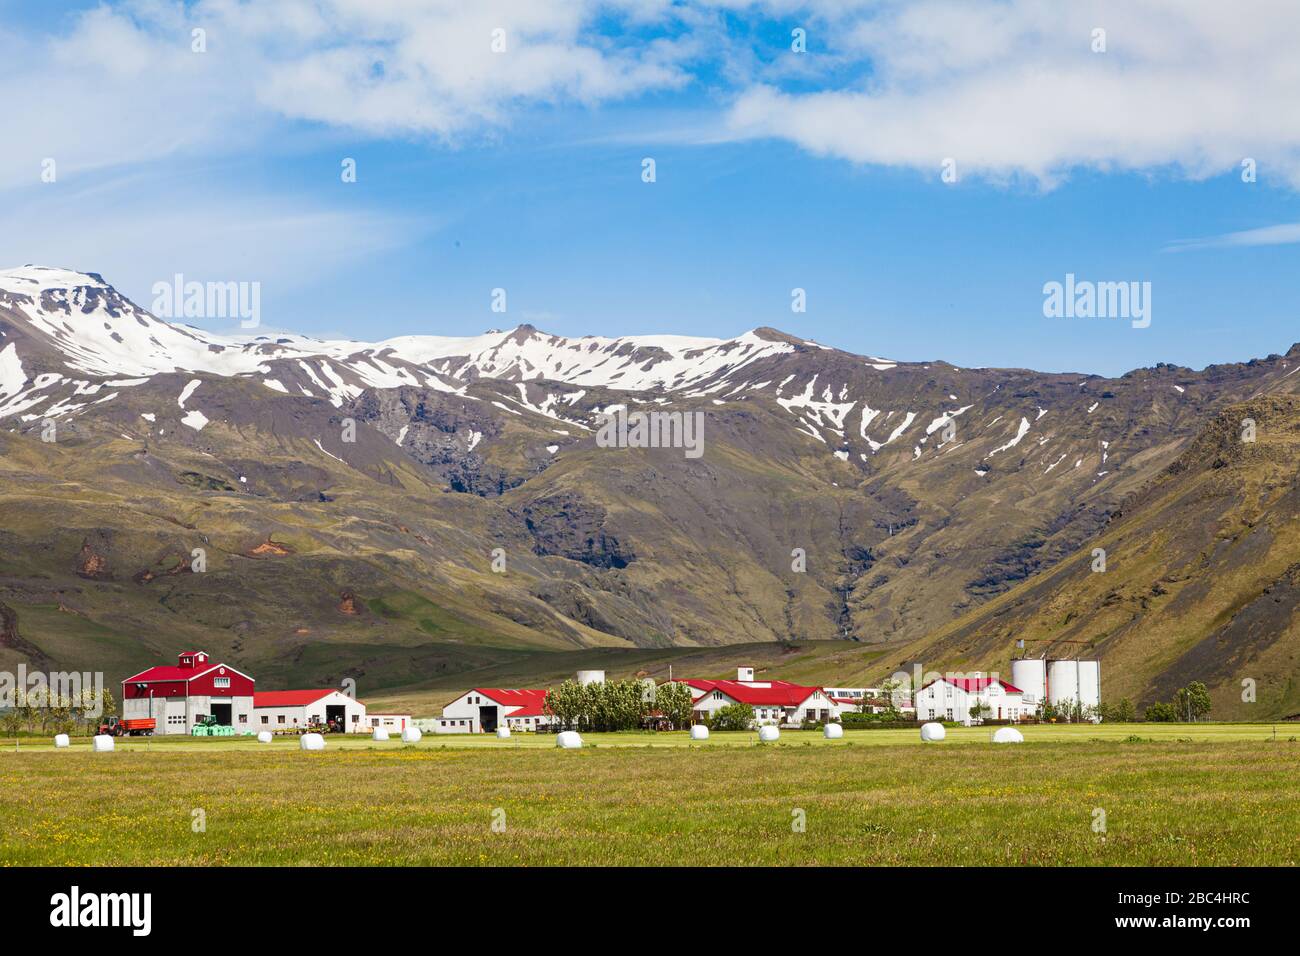 Family farm under the shadow of the Eyjafjallajokull volcano which erupted in 2010 Stock Photo